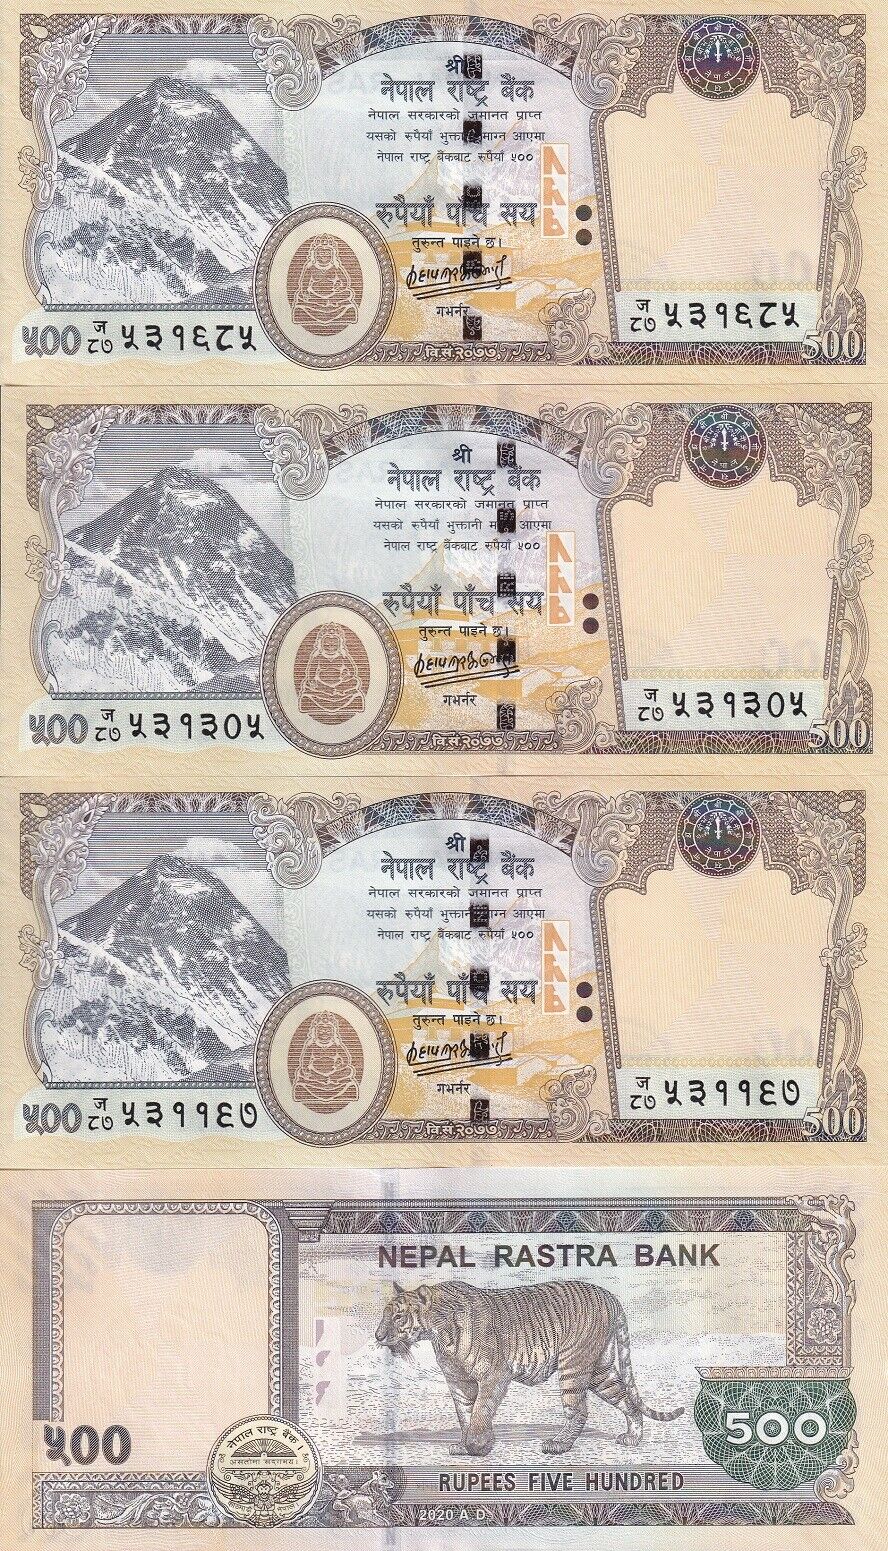 Nepal 500 Rupees 2020 P 81 New Sign One Tiger UNC LOT 3 PCS